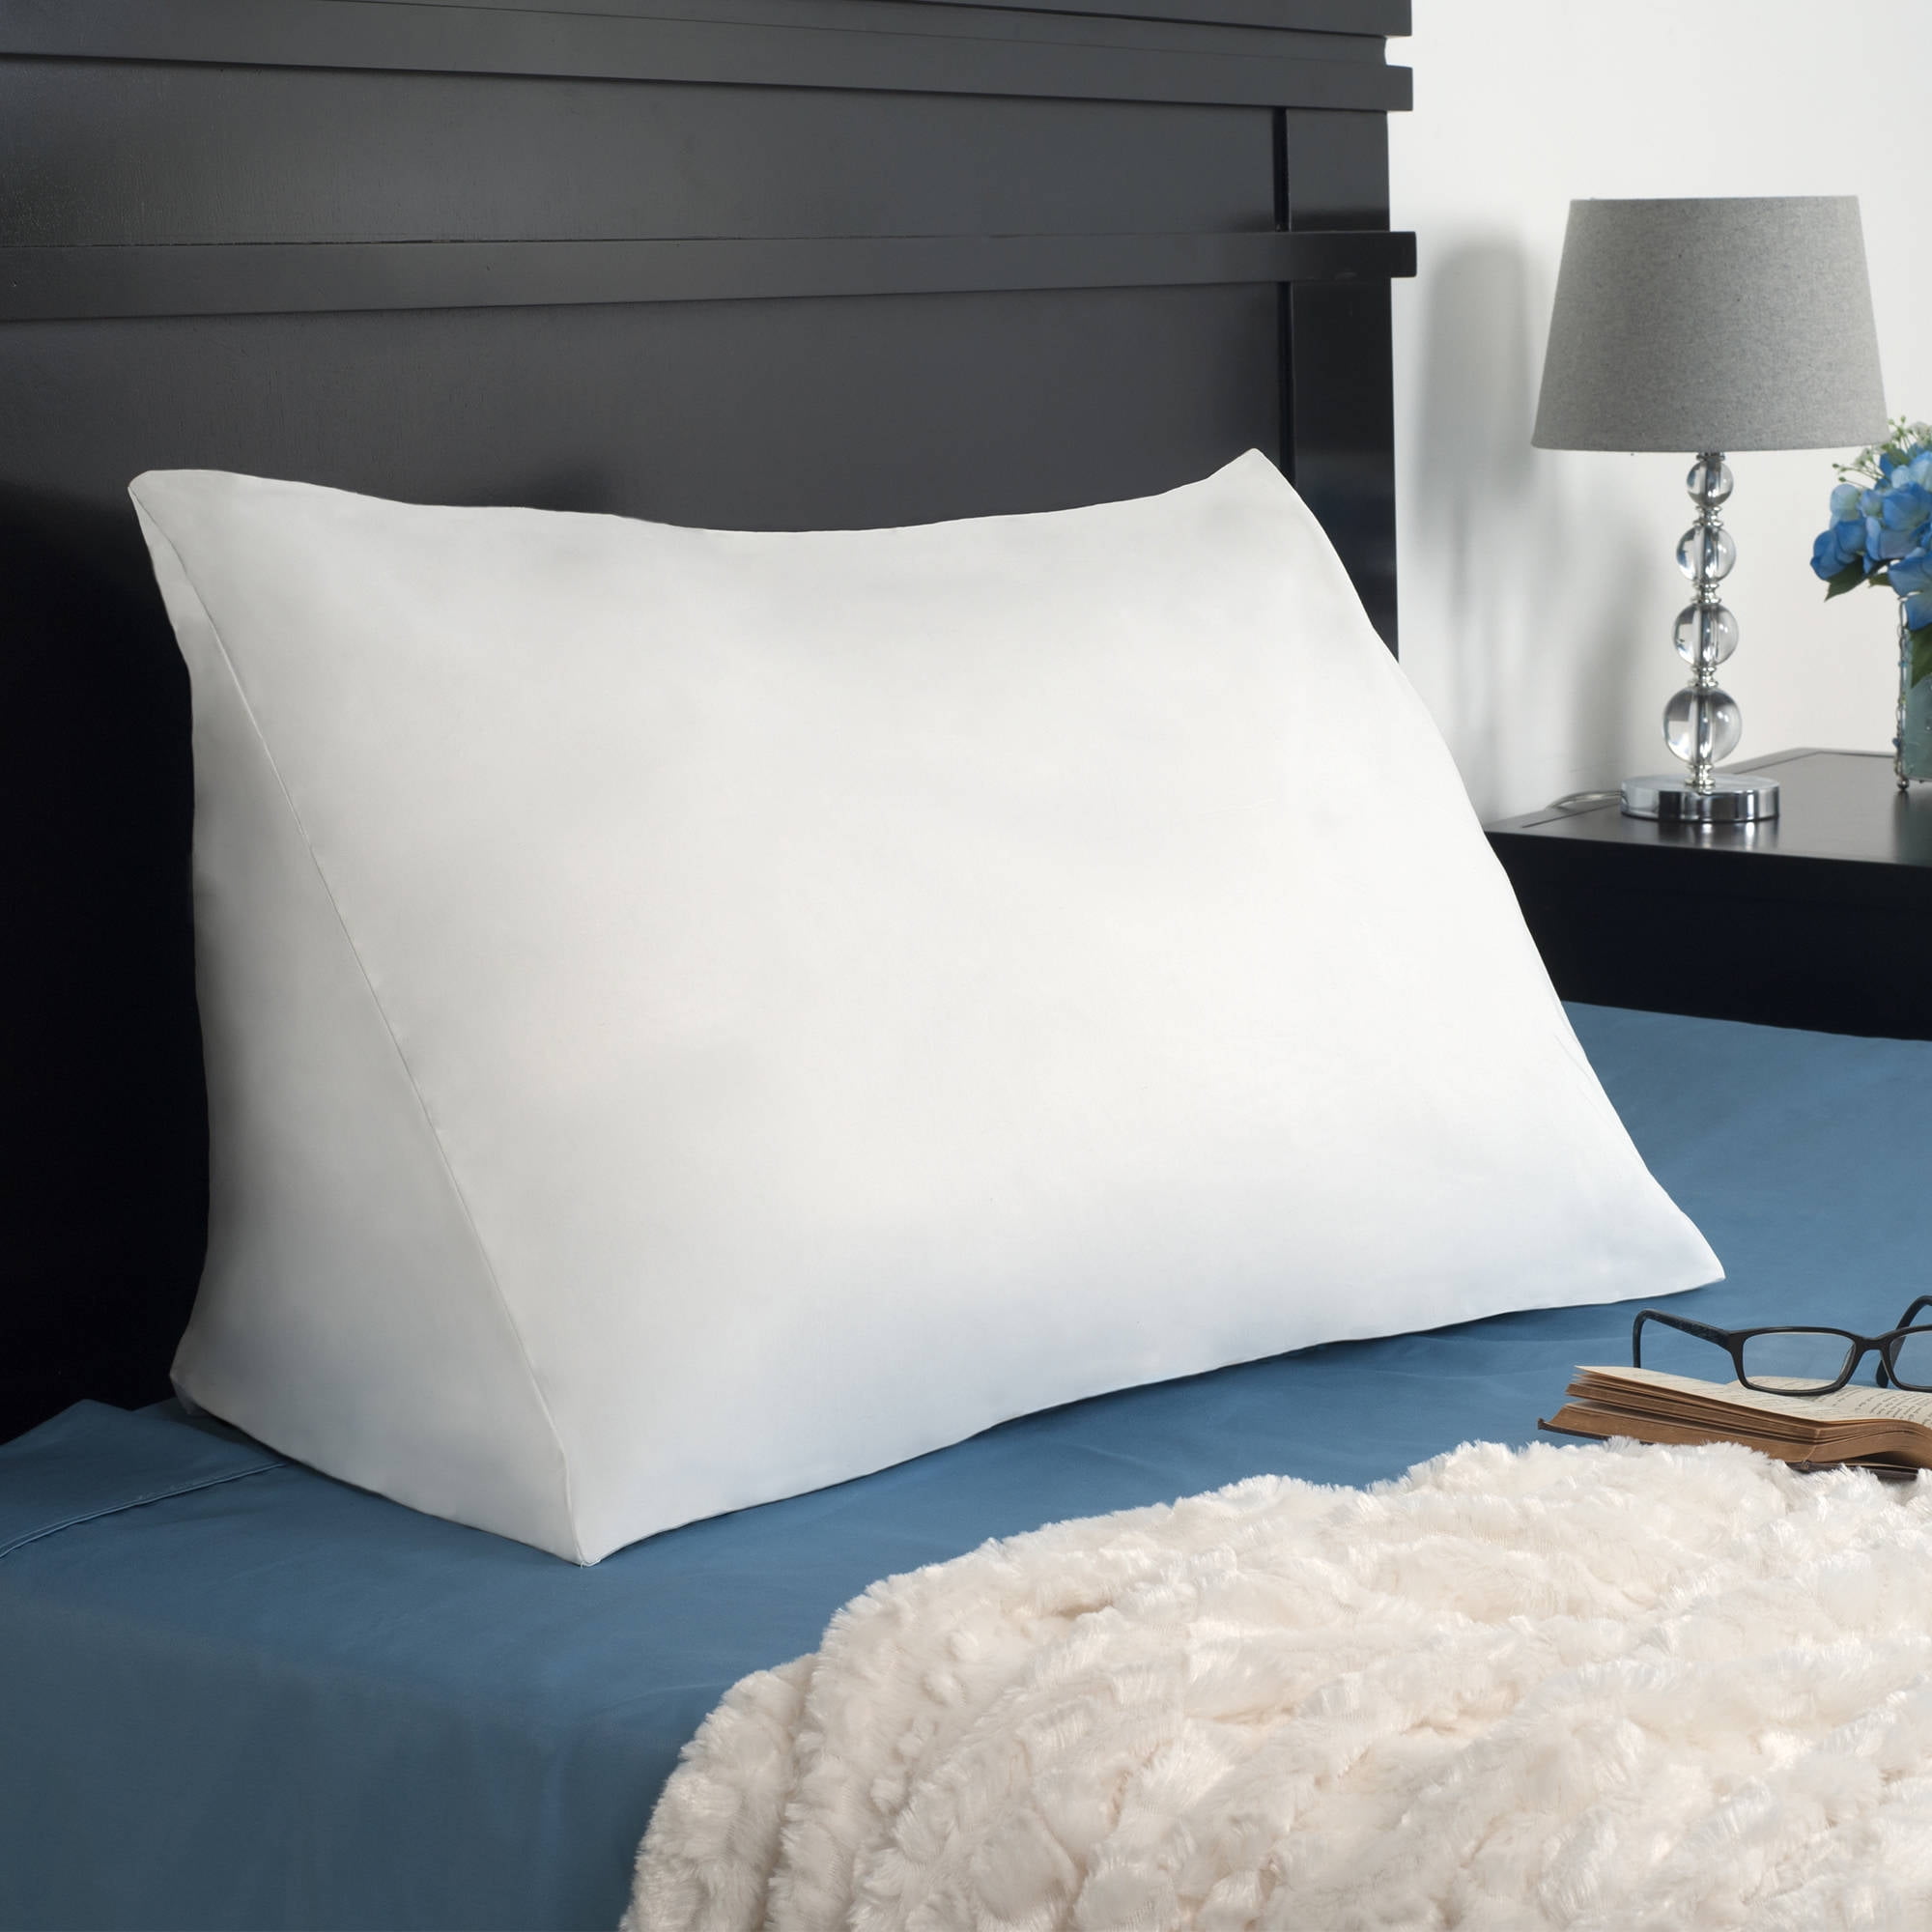 A Sciatica Pillow That Helps You Sleep Comfortably • Wedge Pillow Blog